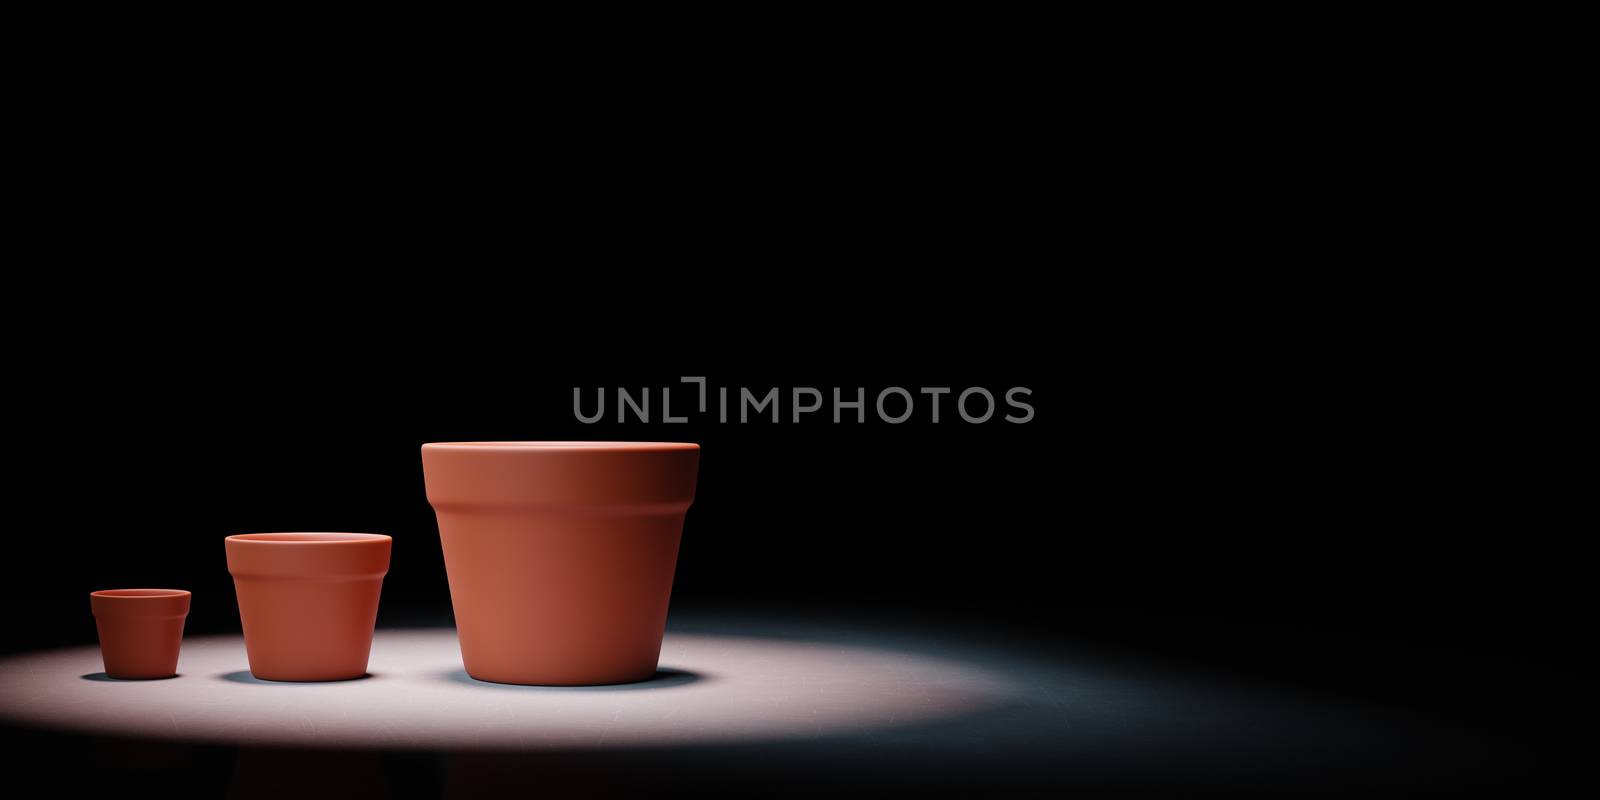 Set of Three, Increasing Size, Earthenware Empty Flowerpot Spotlighted on Black Background with Copy Space 3D Illustration